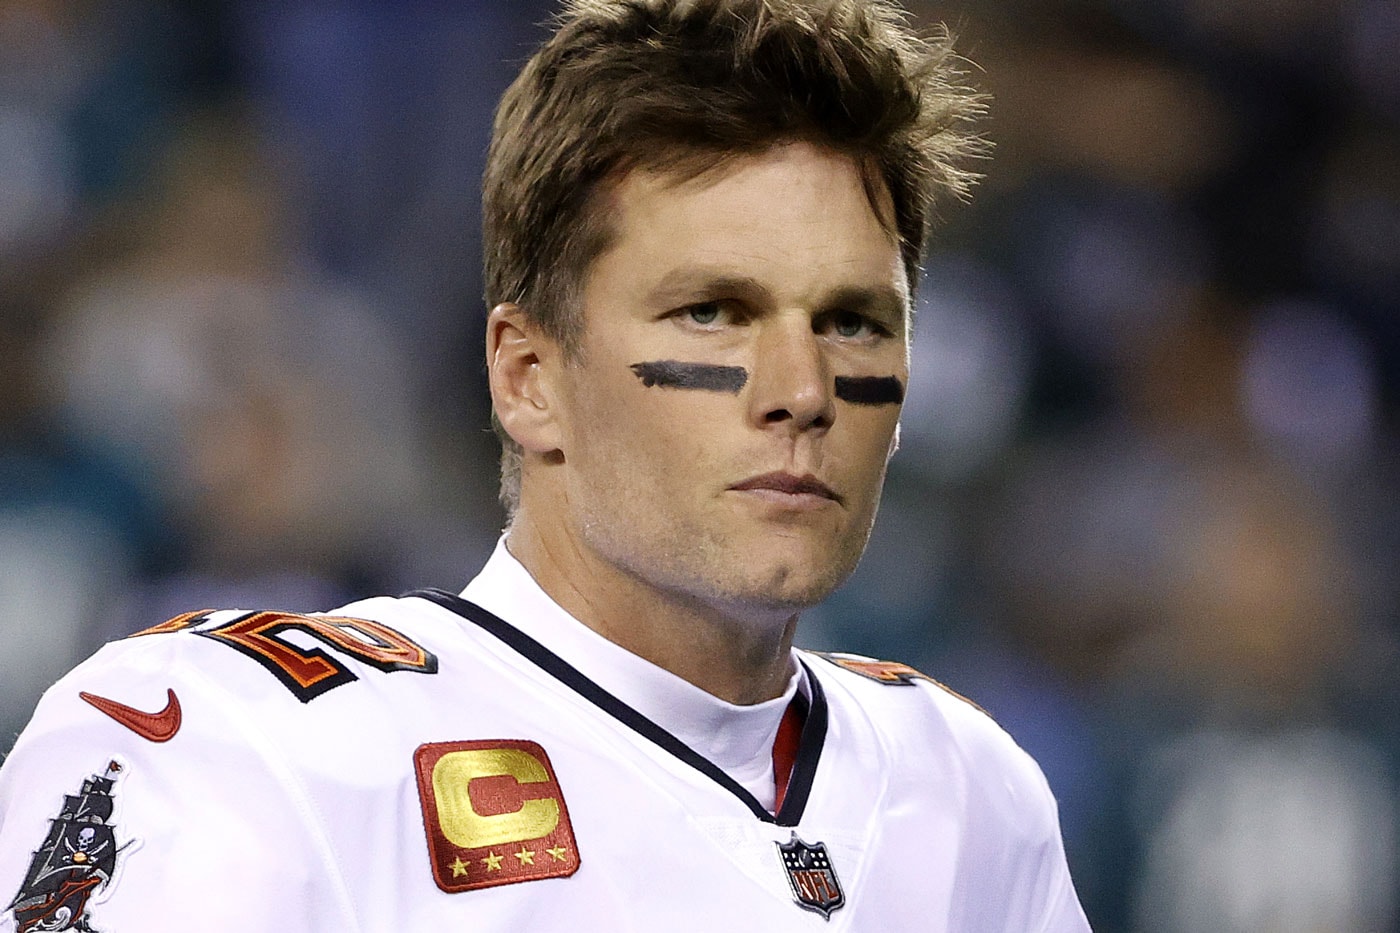 Tom Brady Reportedly Only Returned to the Bucs After Miami Dolphins Deal Fell Through nfl qb quarterback american football bruce arians sean payton sued brian flores